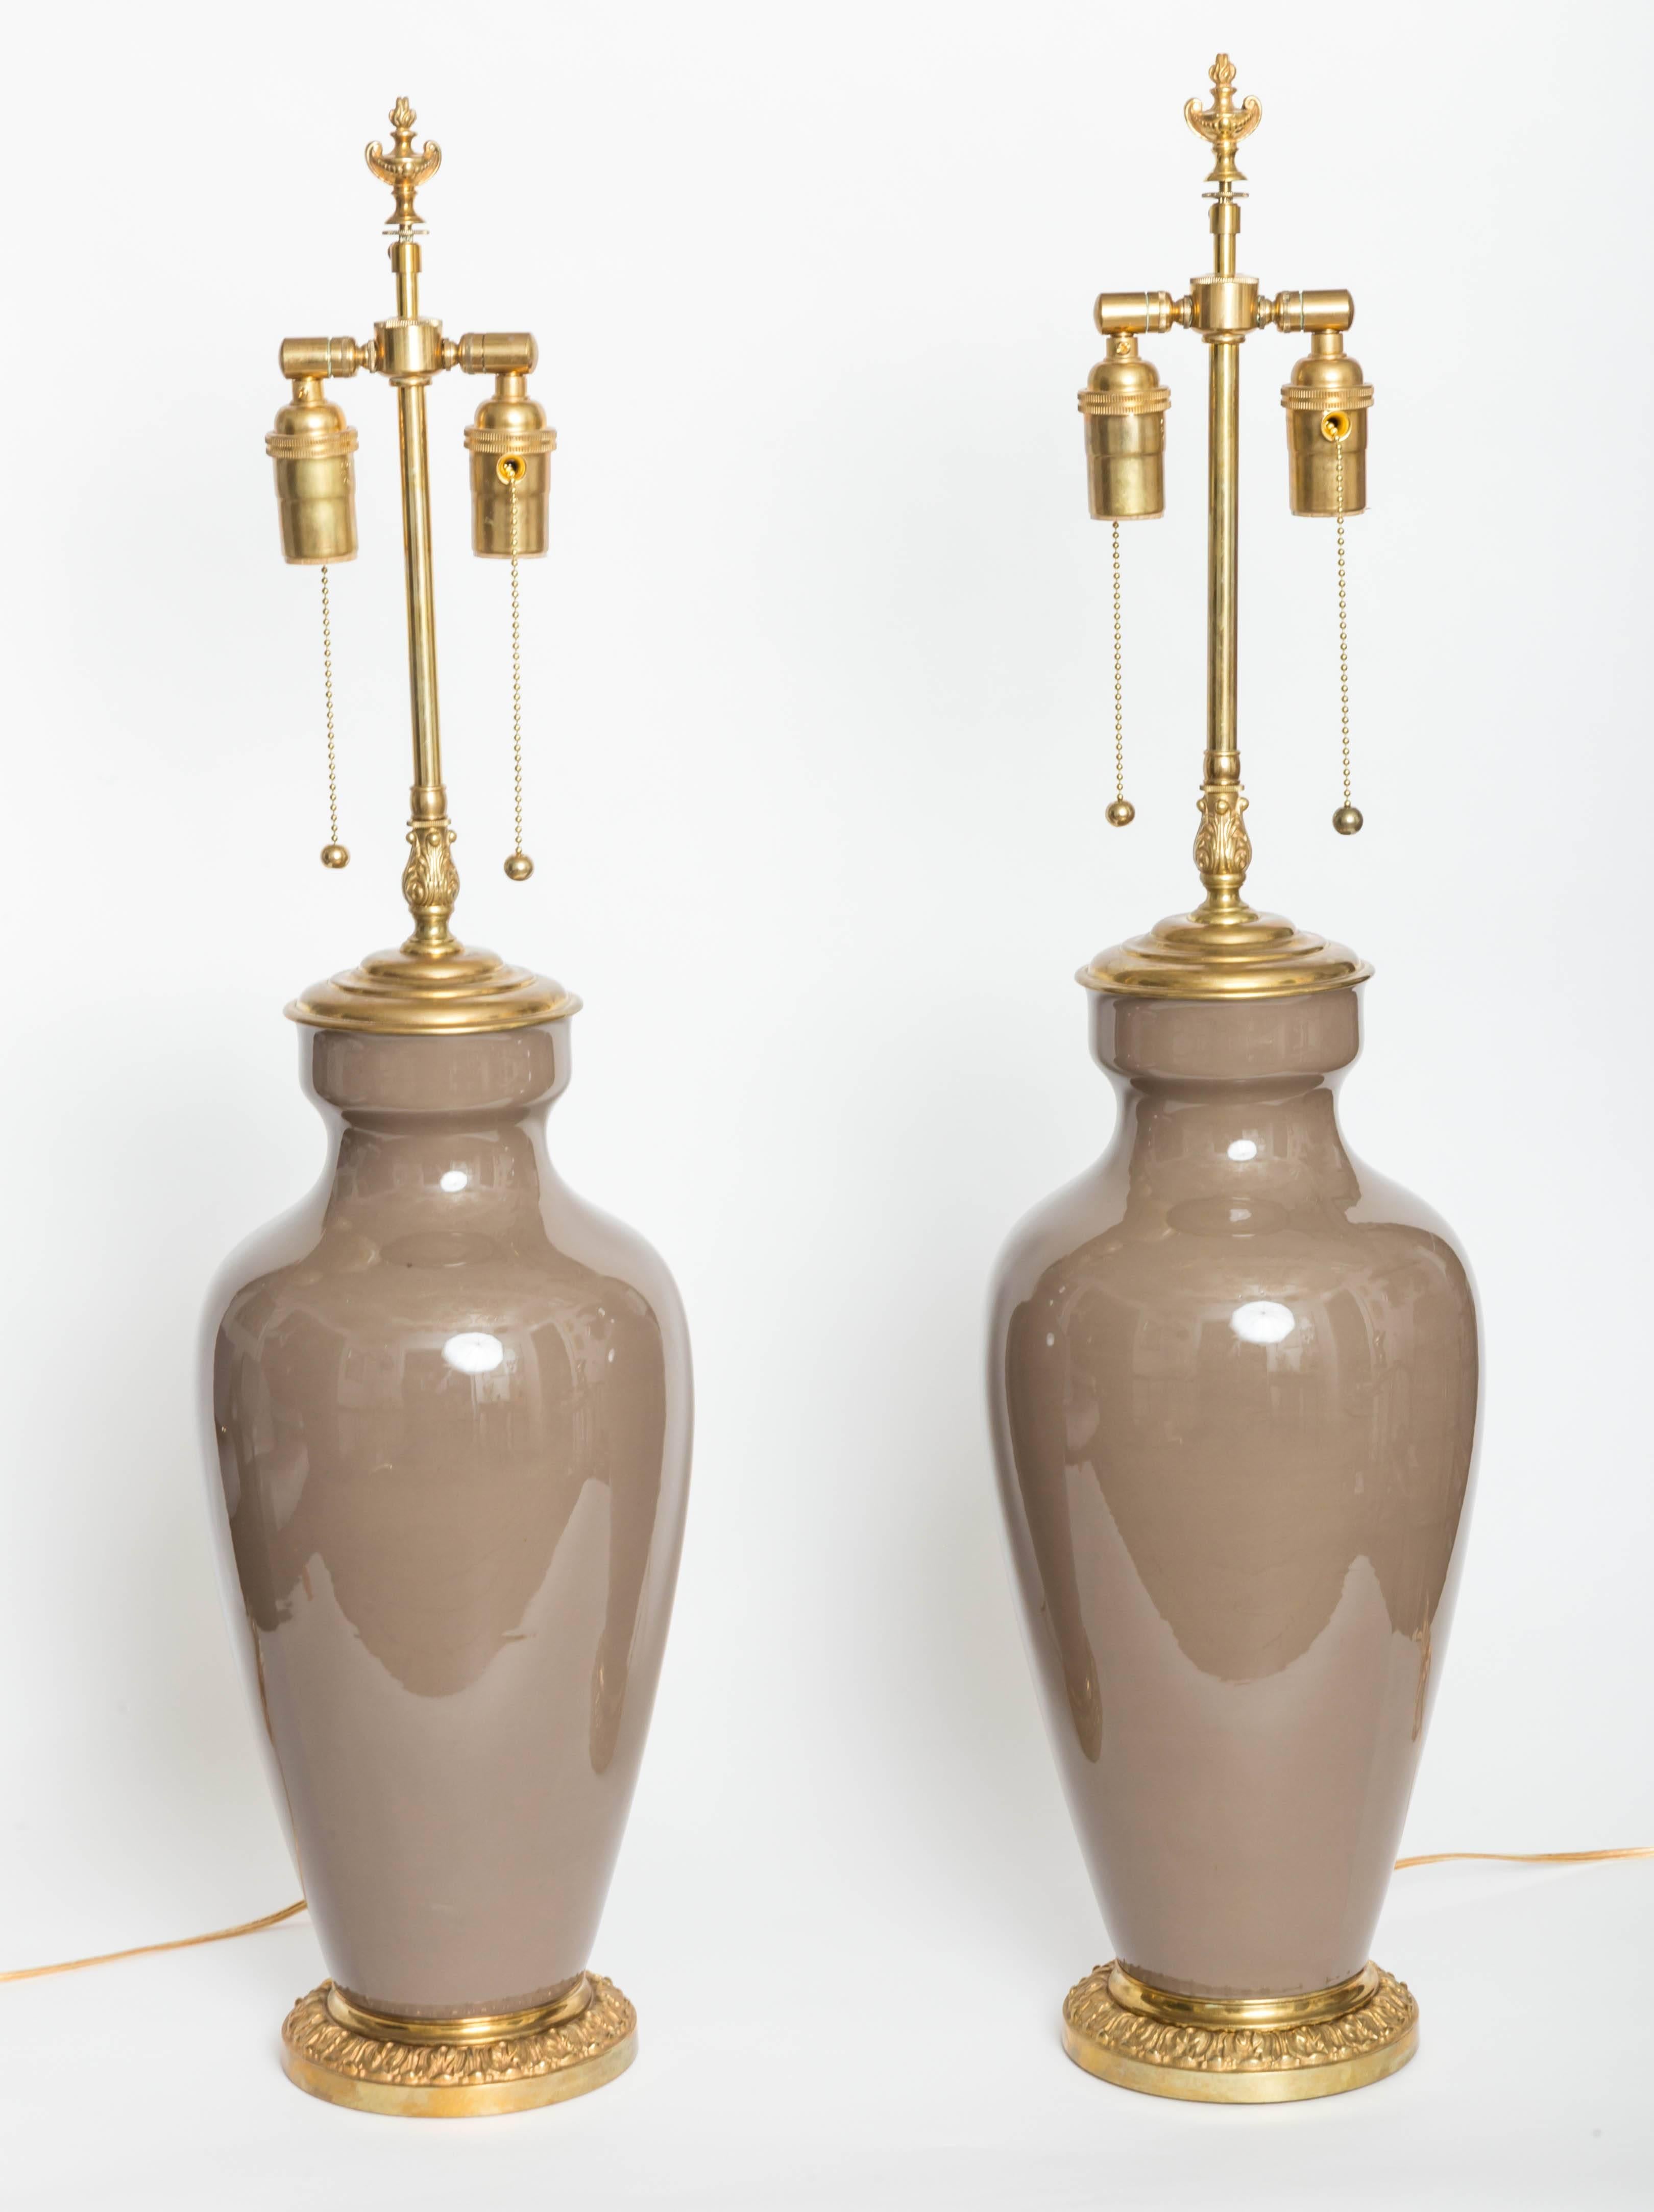 Pair of Greige urn form table lamps with decoratigve bases and finials
by Lenox.